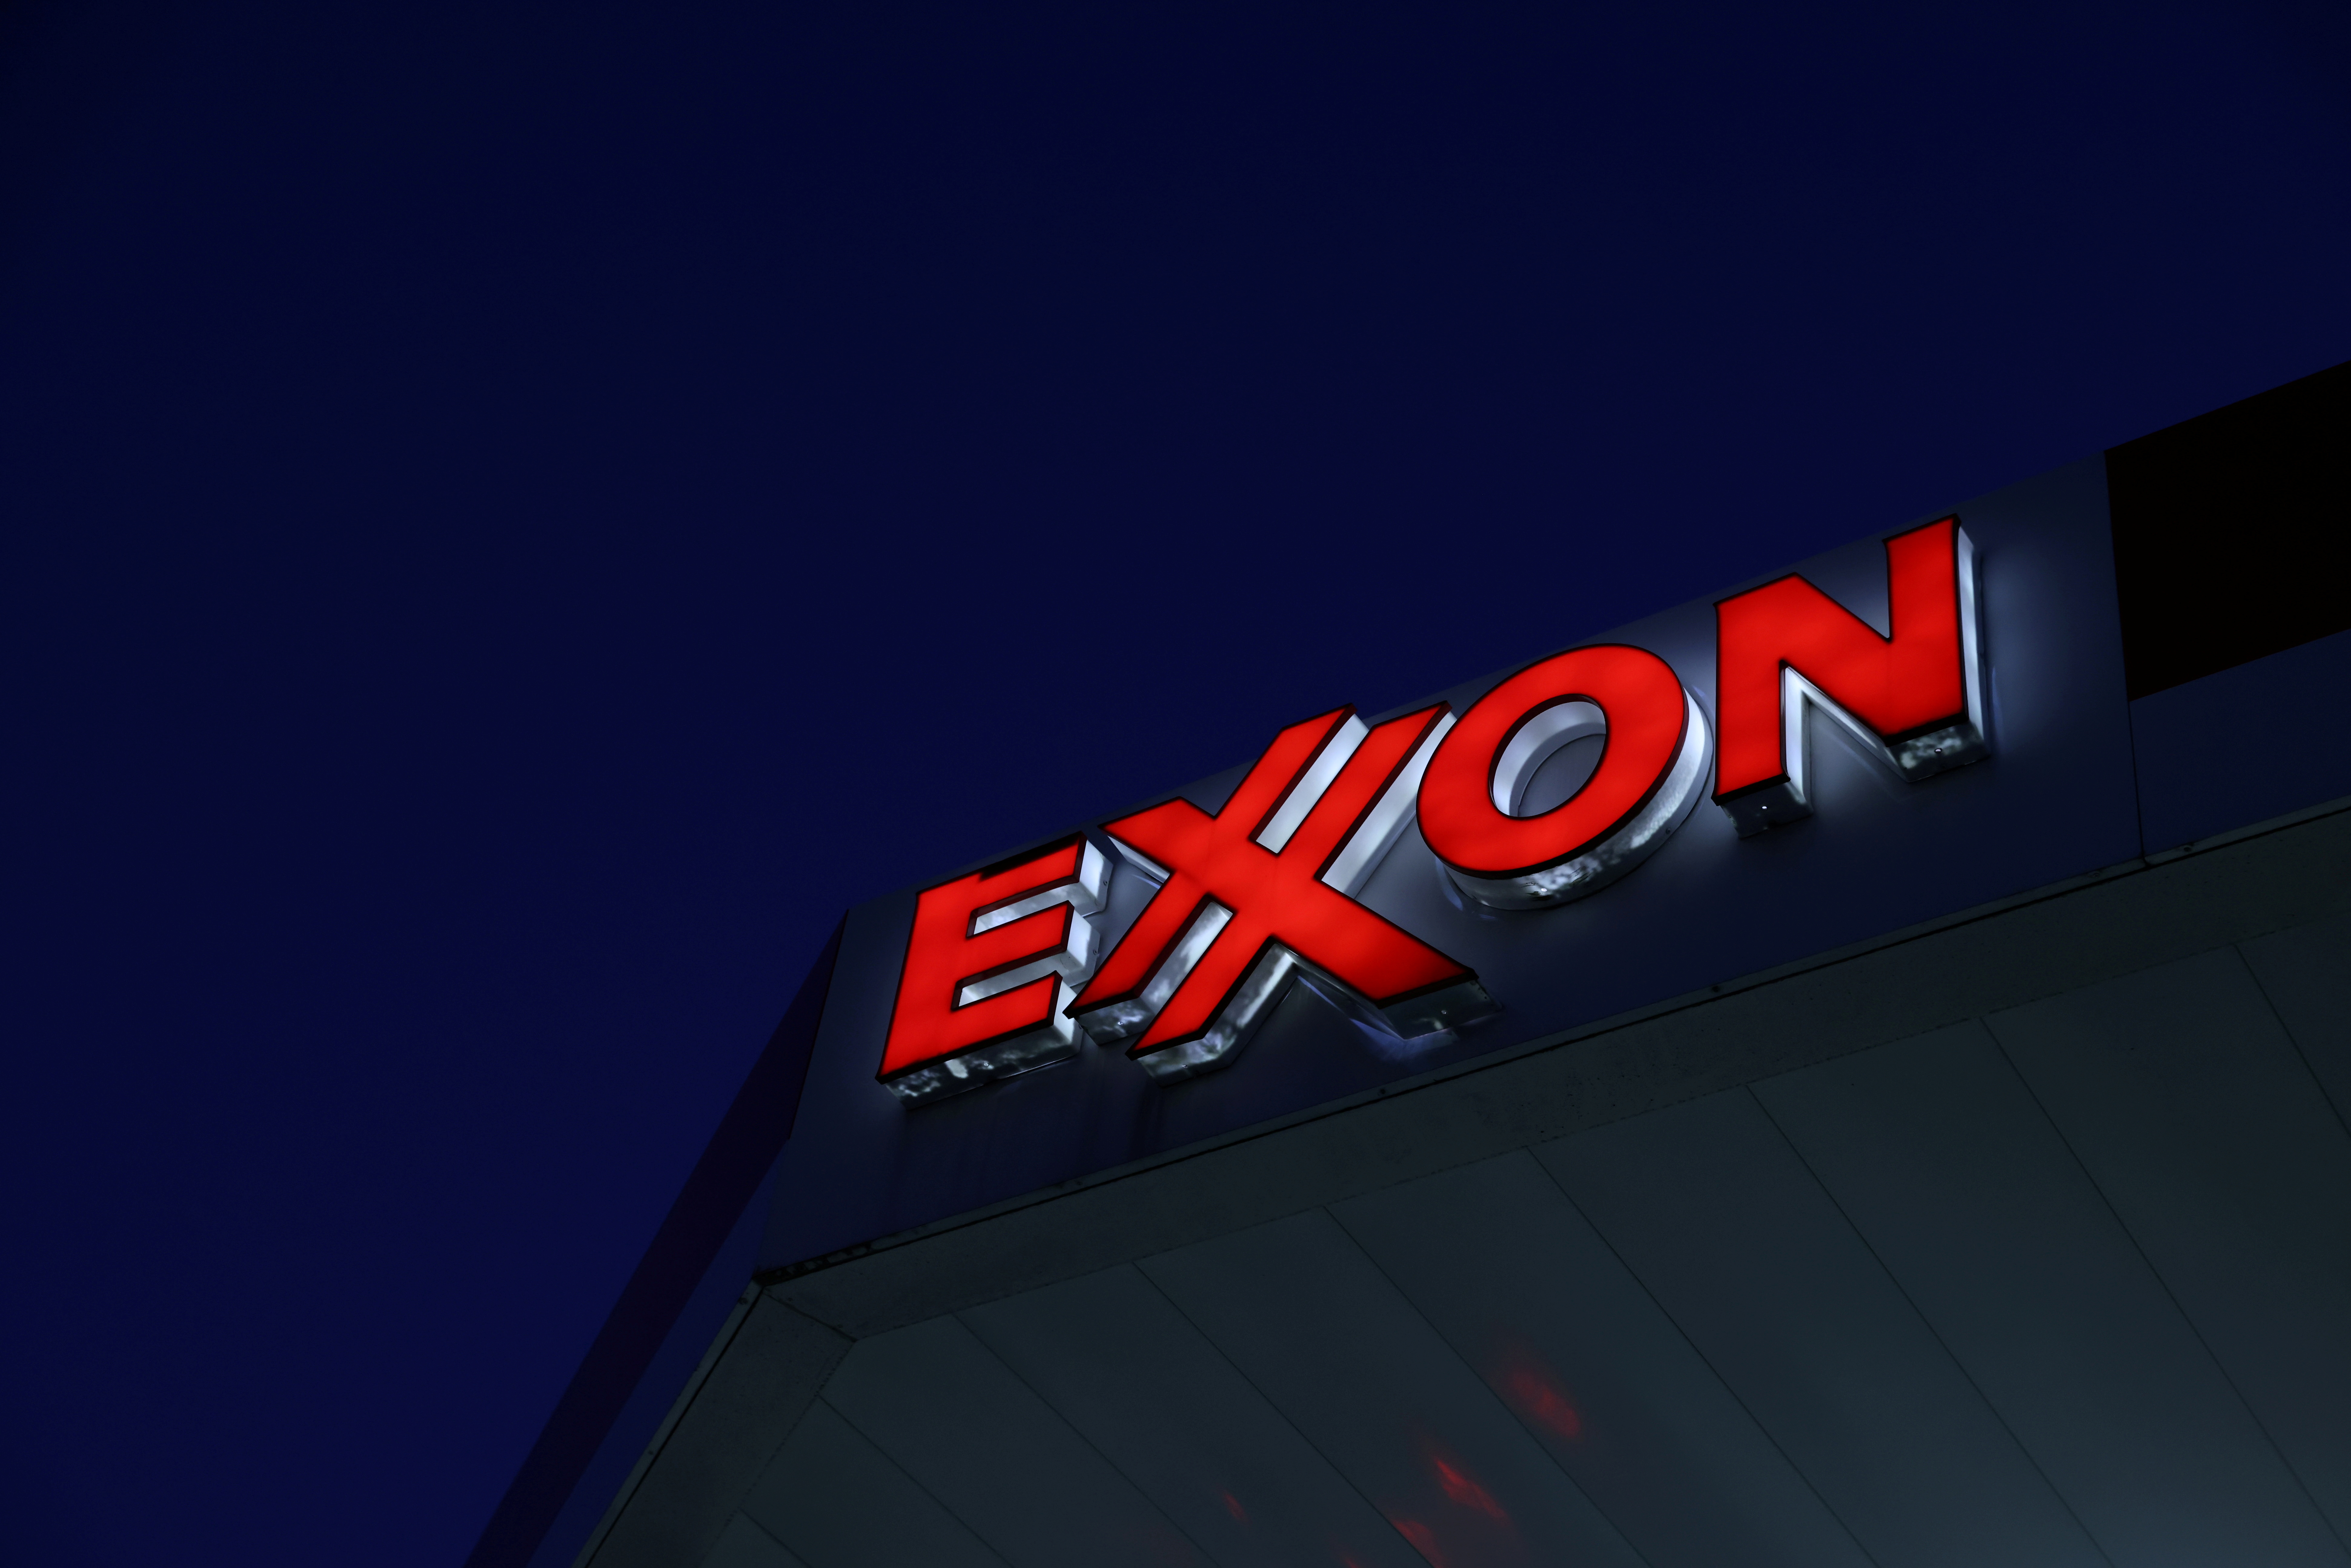 Signage is seen at an Exxon gas station in Brooklyn, New York City, U.S., November 23, 2021. REUTERS/Andrew Kelly/File Photo